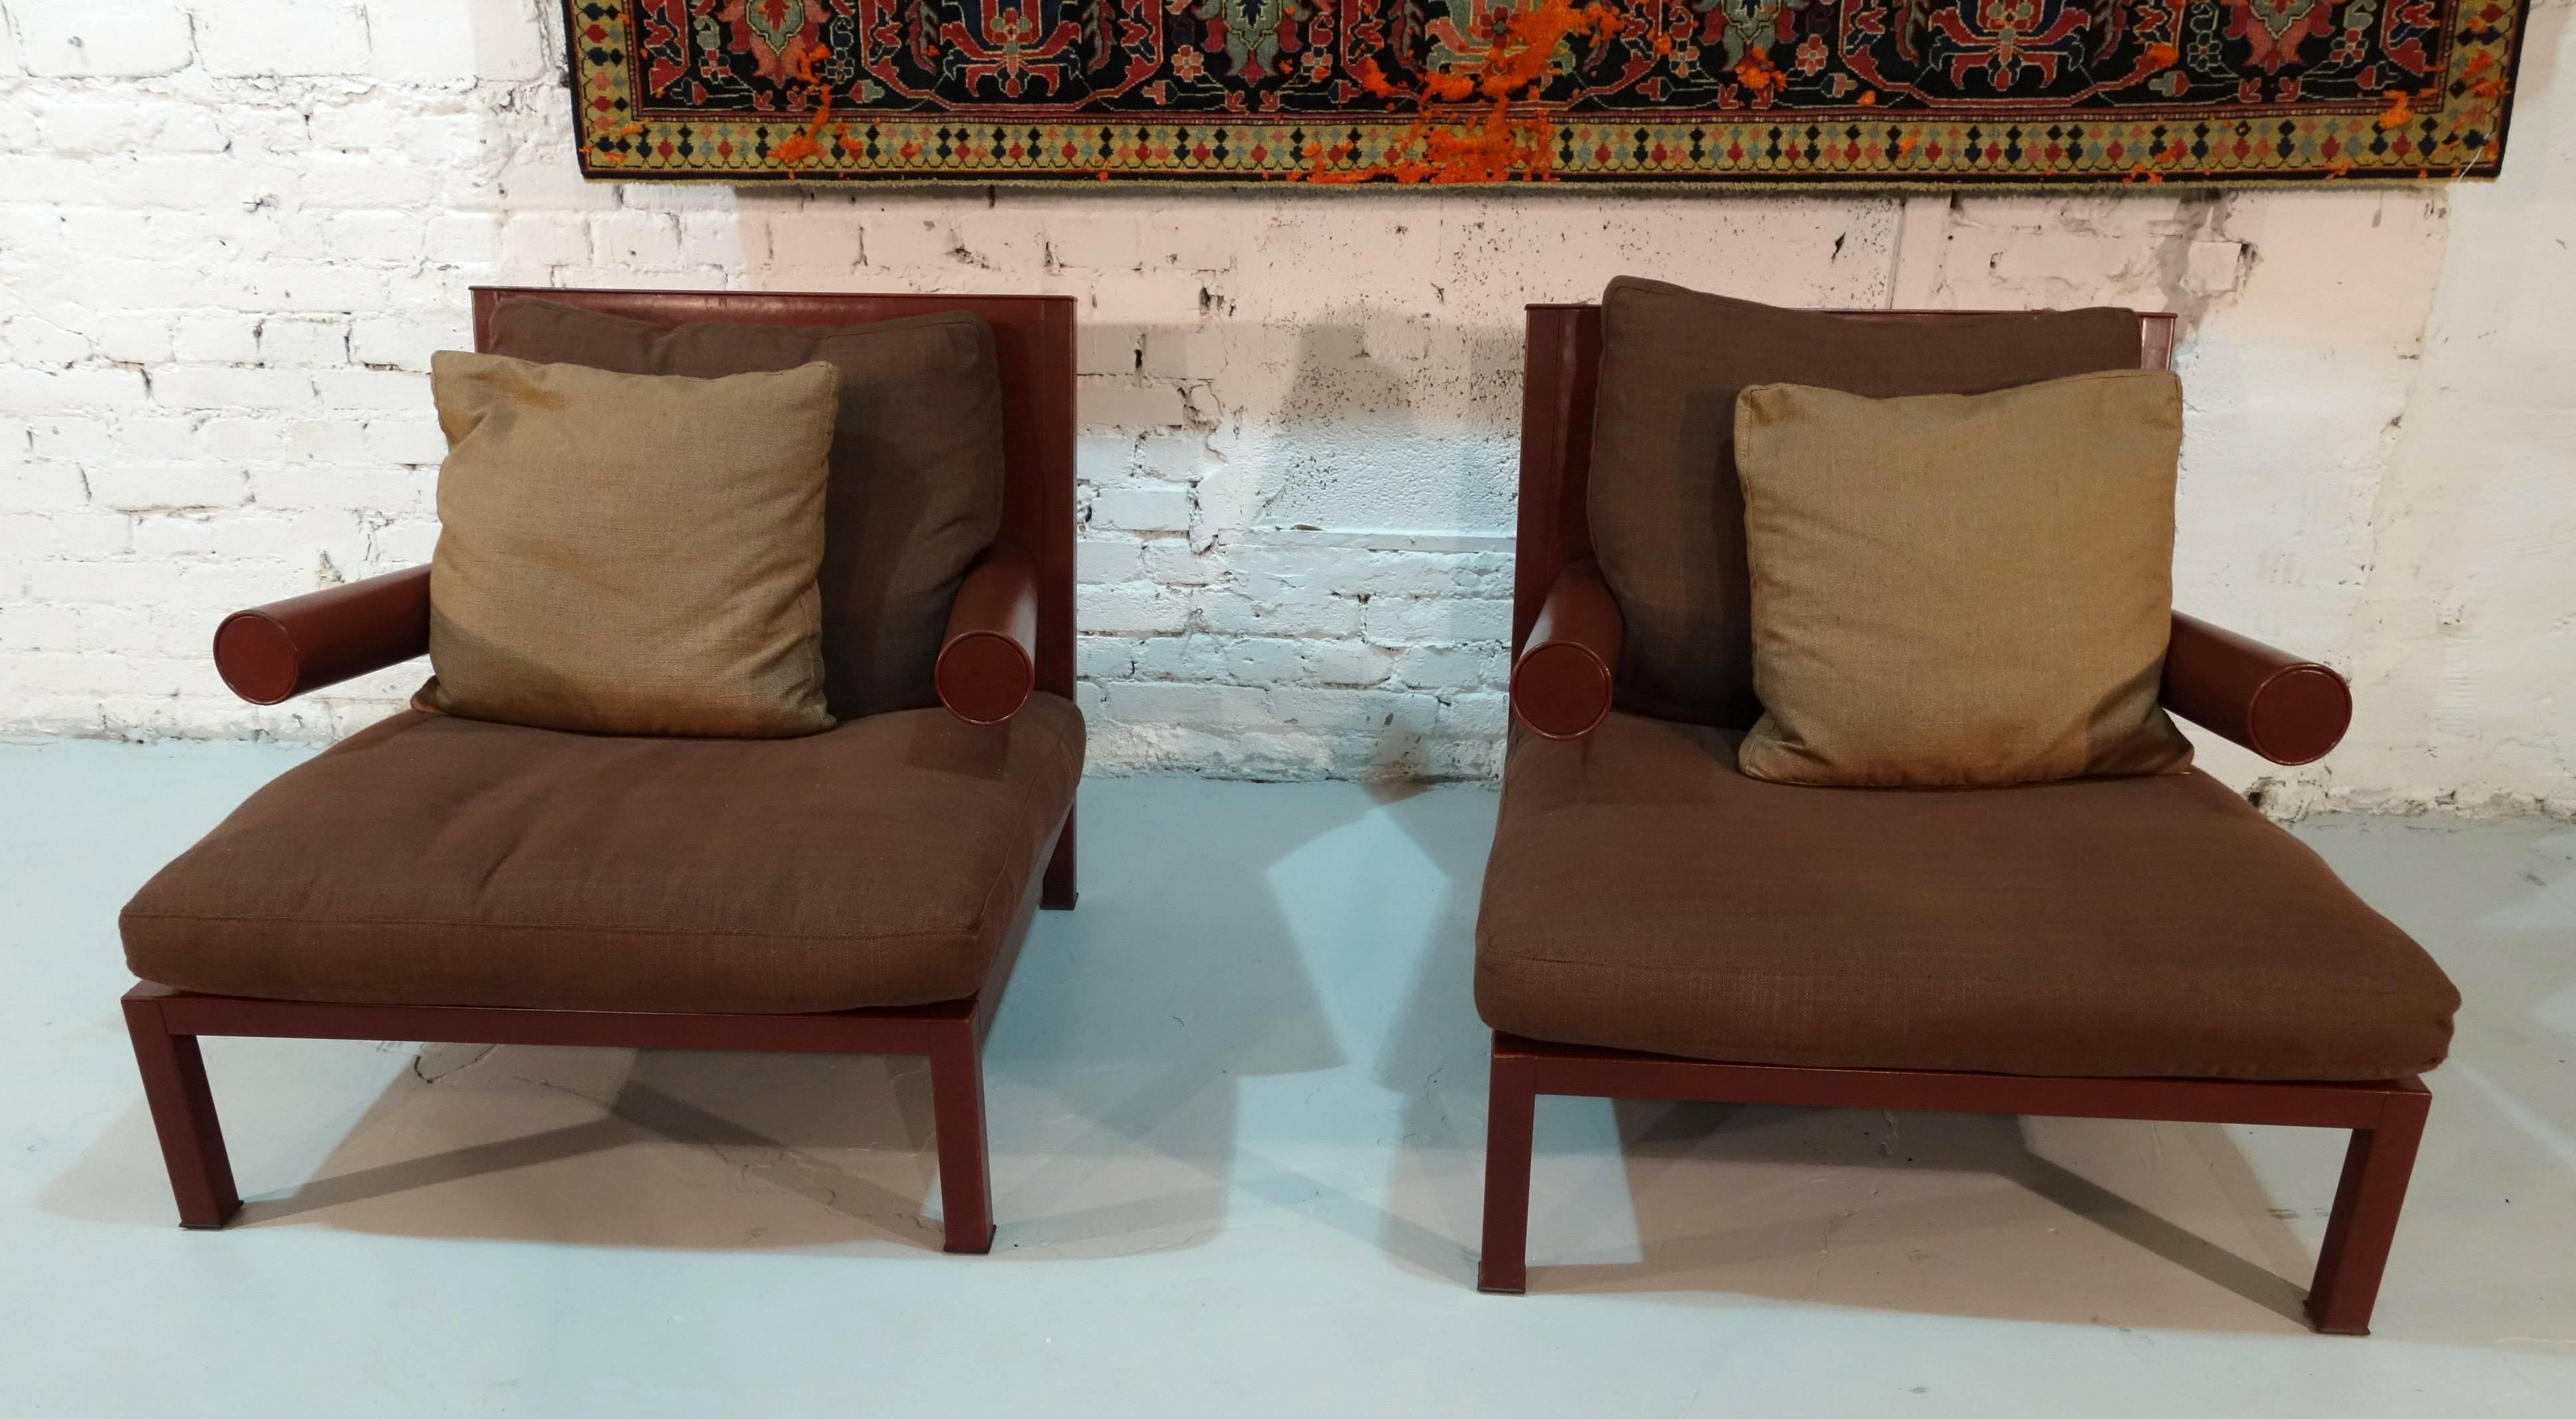 Large pair of armchairs 'Baisity' by Antonio Citterio for B&B with cushions in fabric.
Frame covered in brown leather.